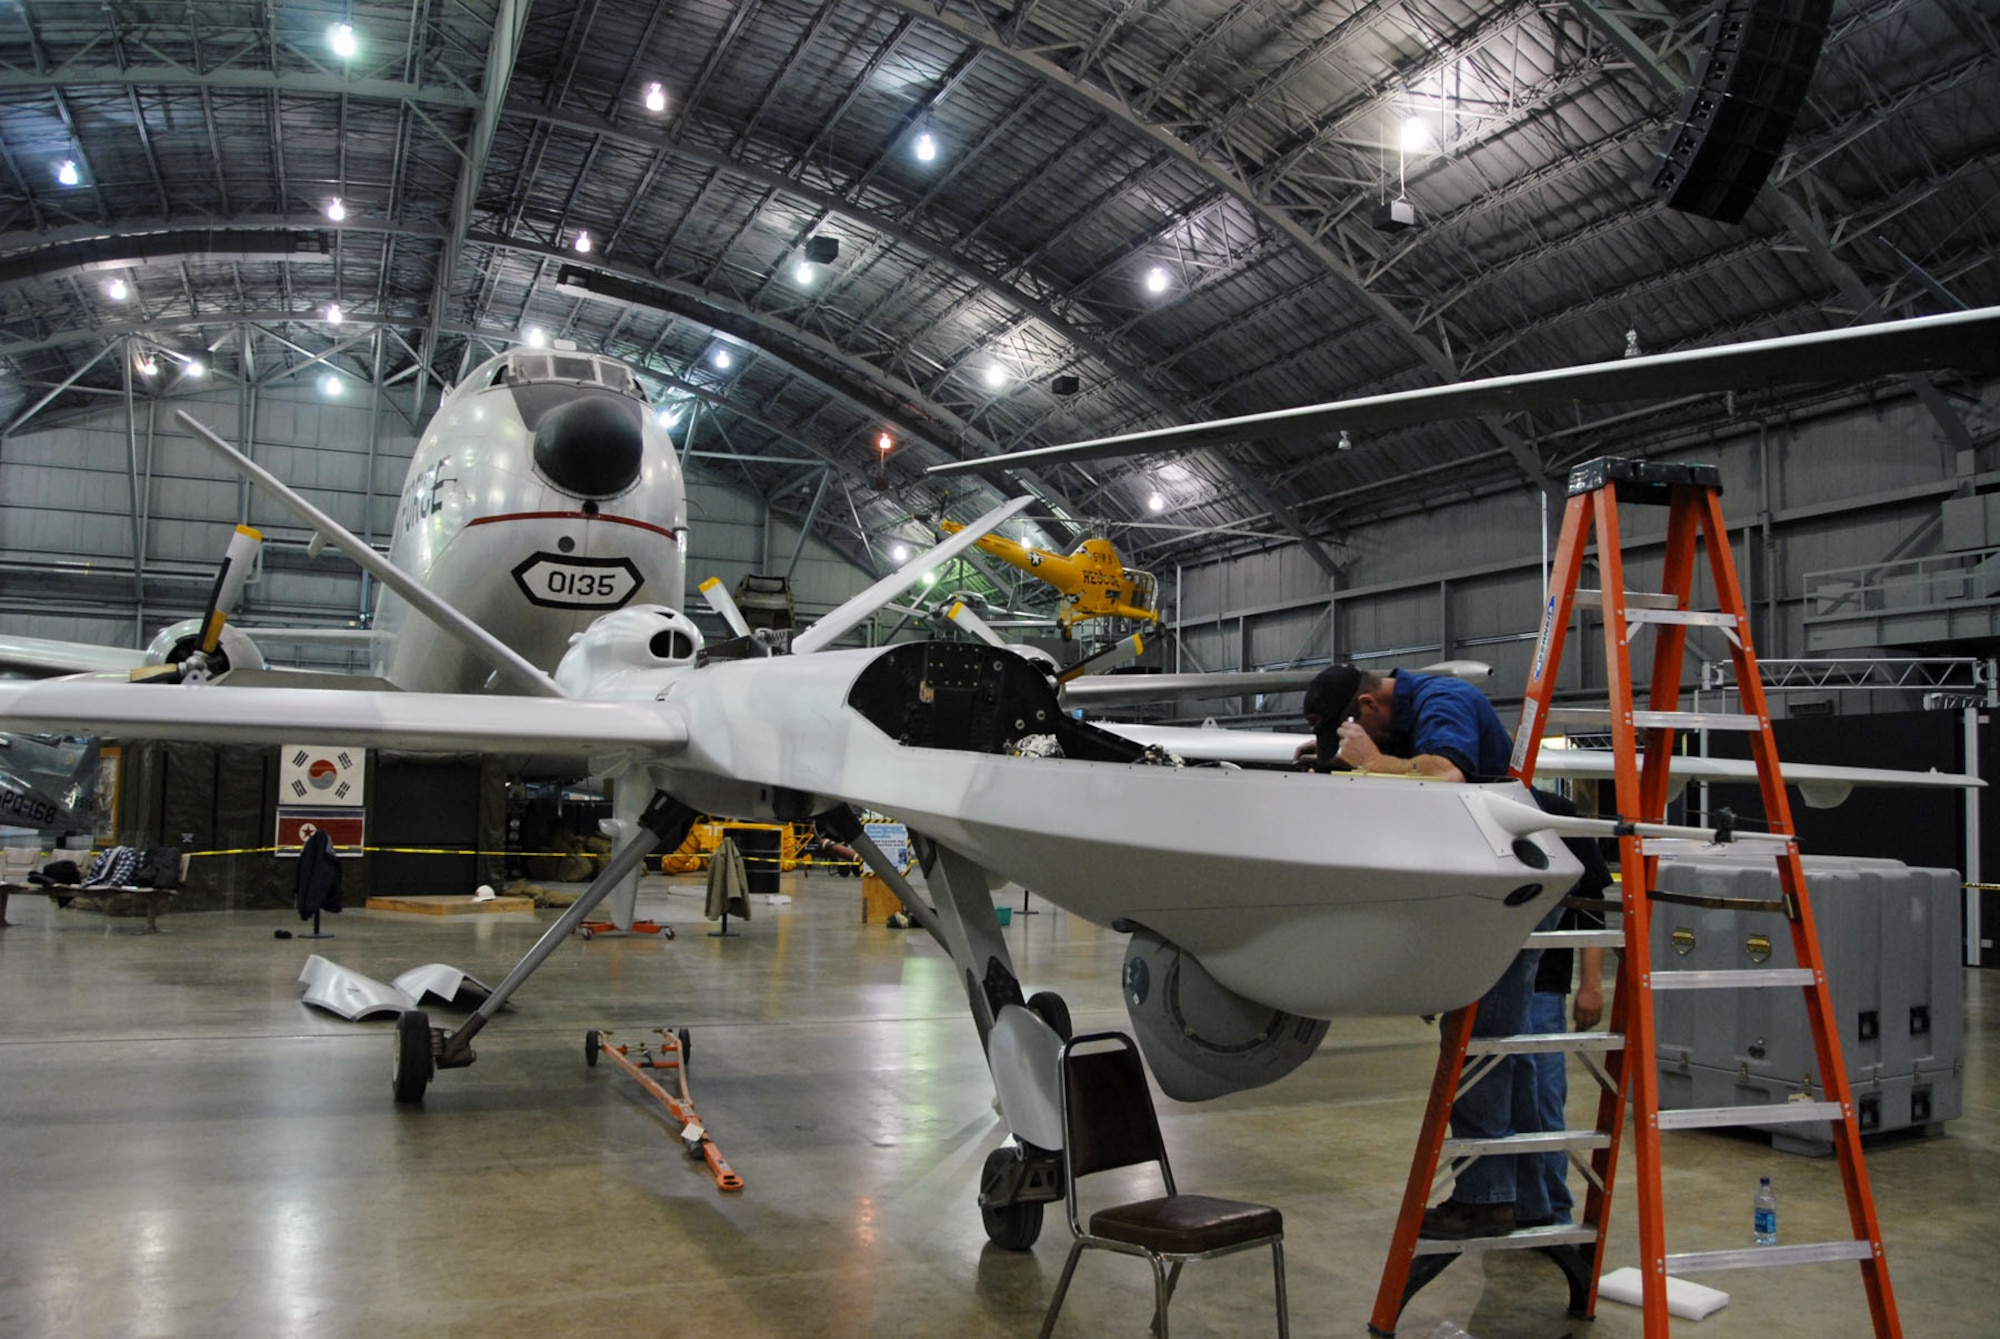 DAYTON, Ohio (01/2010) -- Restoration crews from General Atomics and the National Museum of the U.S. Air Force assemble the General Atomics YMQ-9 Reaper. (U.S. Air Force photo)